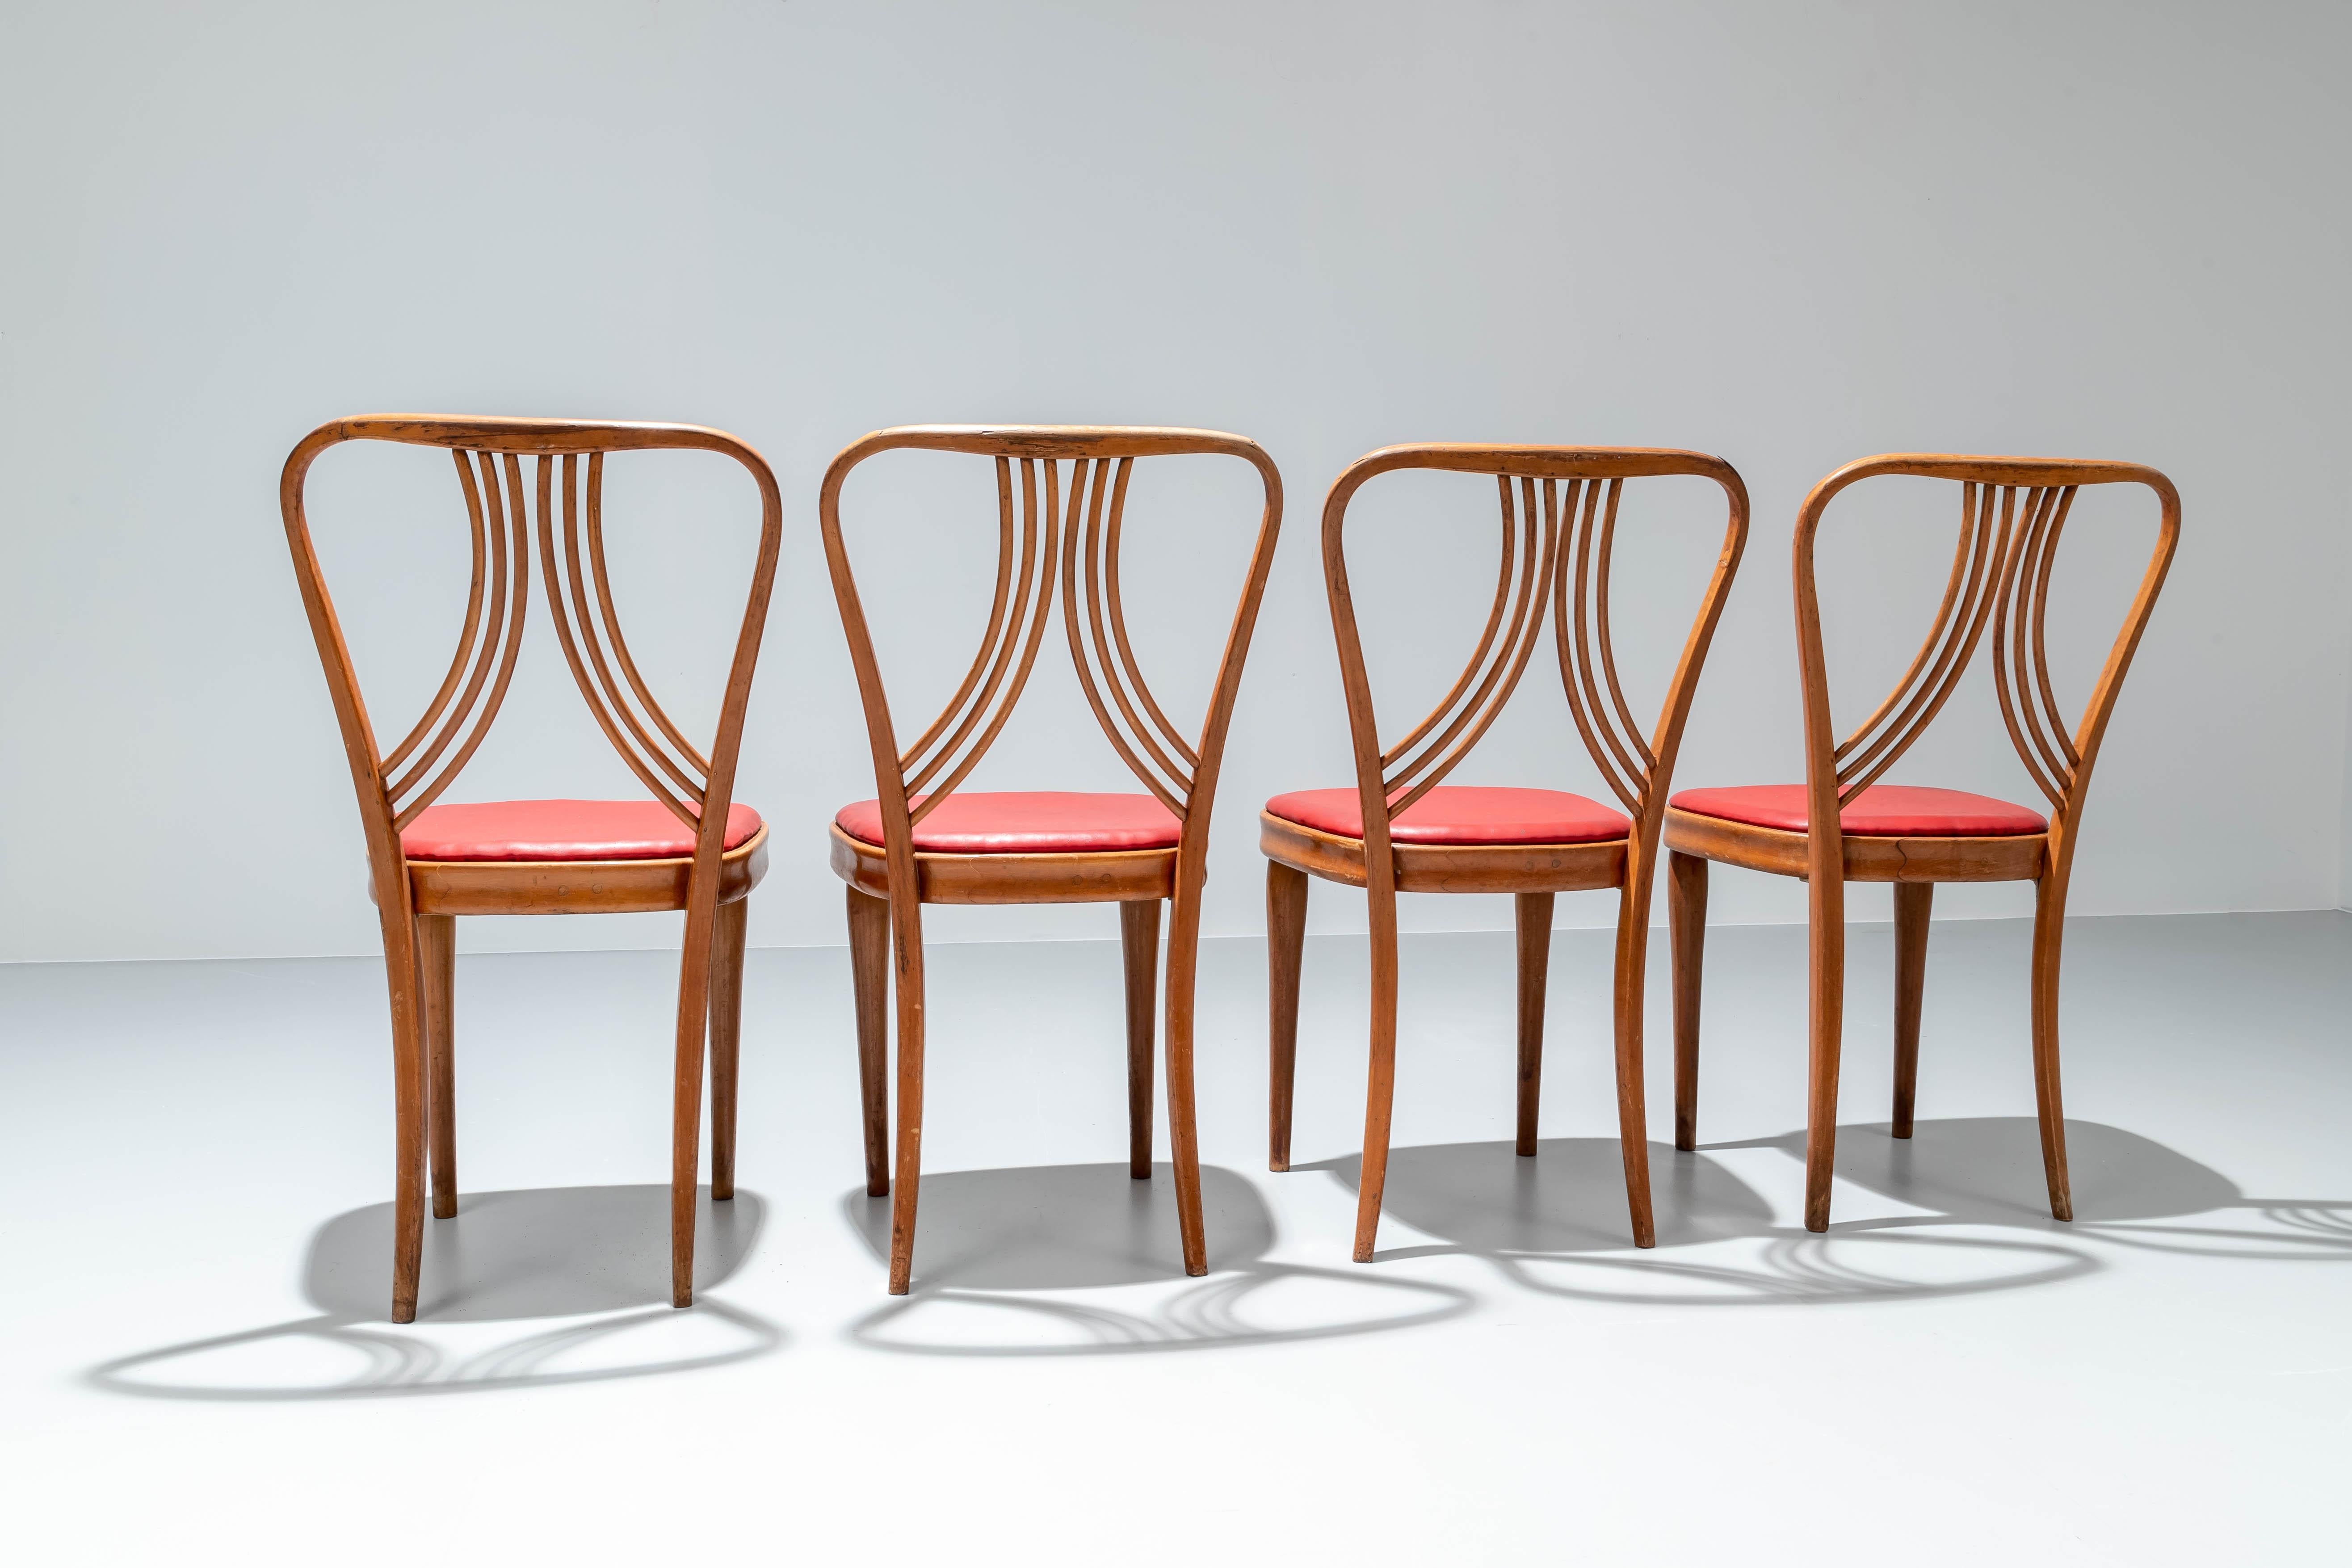 Italian Set of 4 Diningroom Chairs in Blond Wood and Red Faux Leather, Italy, 1950's For Sale